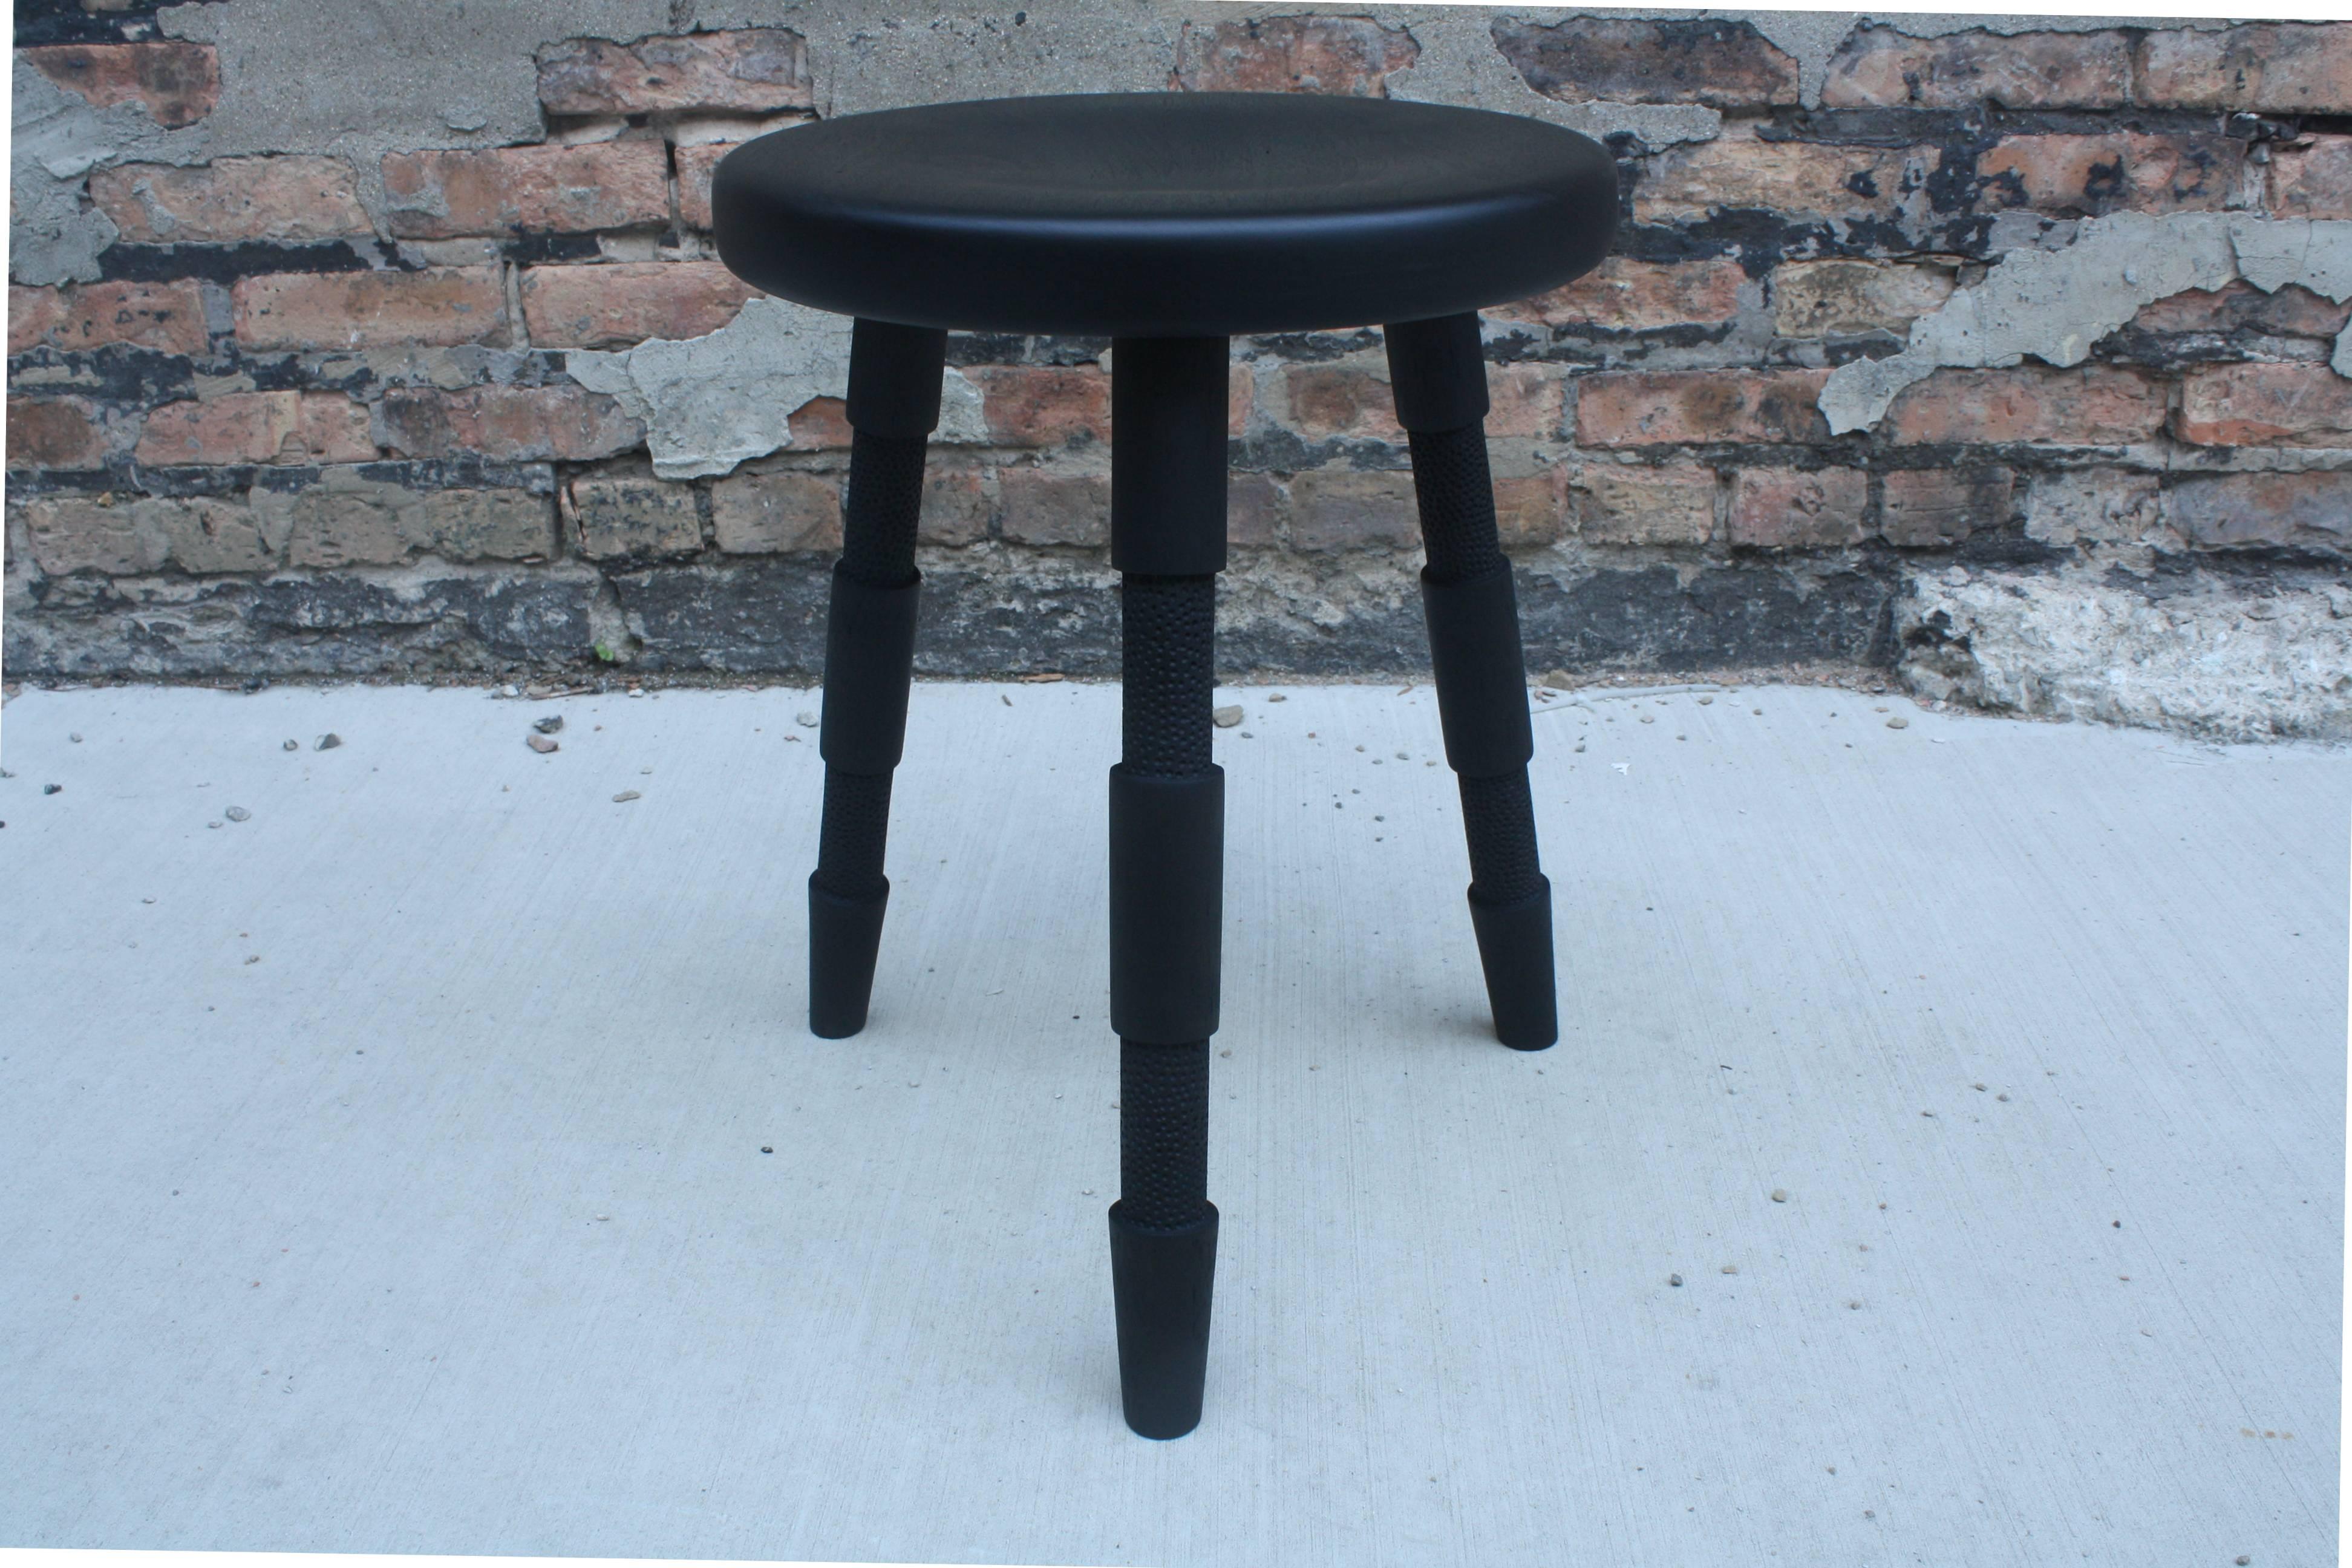 American Saddle, Handmade Wood Stool with Textured Legs and a Carved Seat For Sale